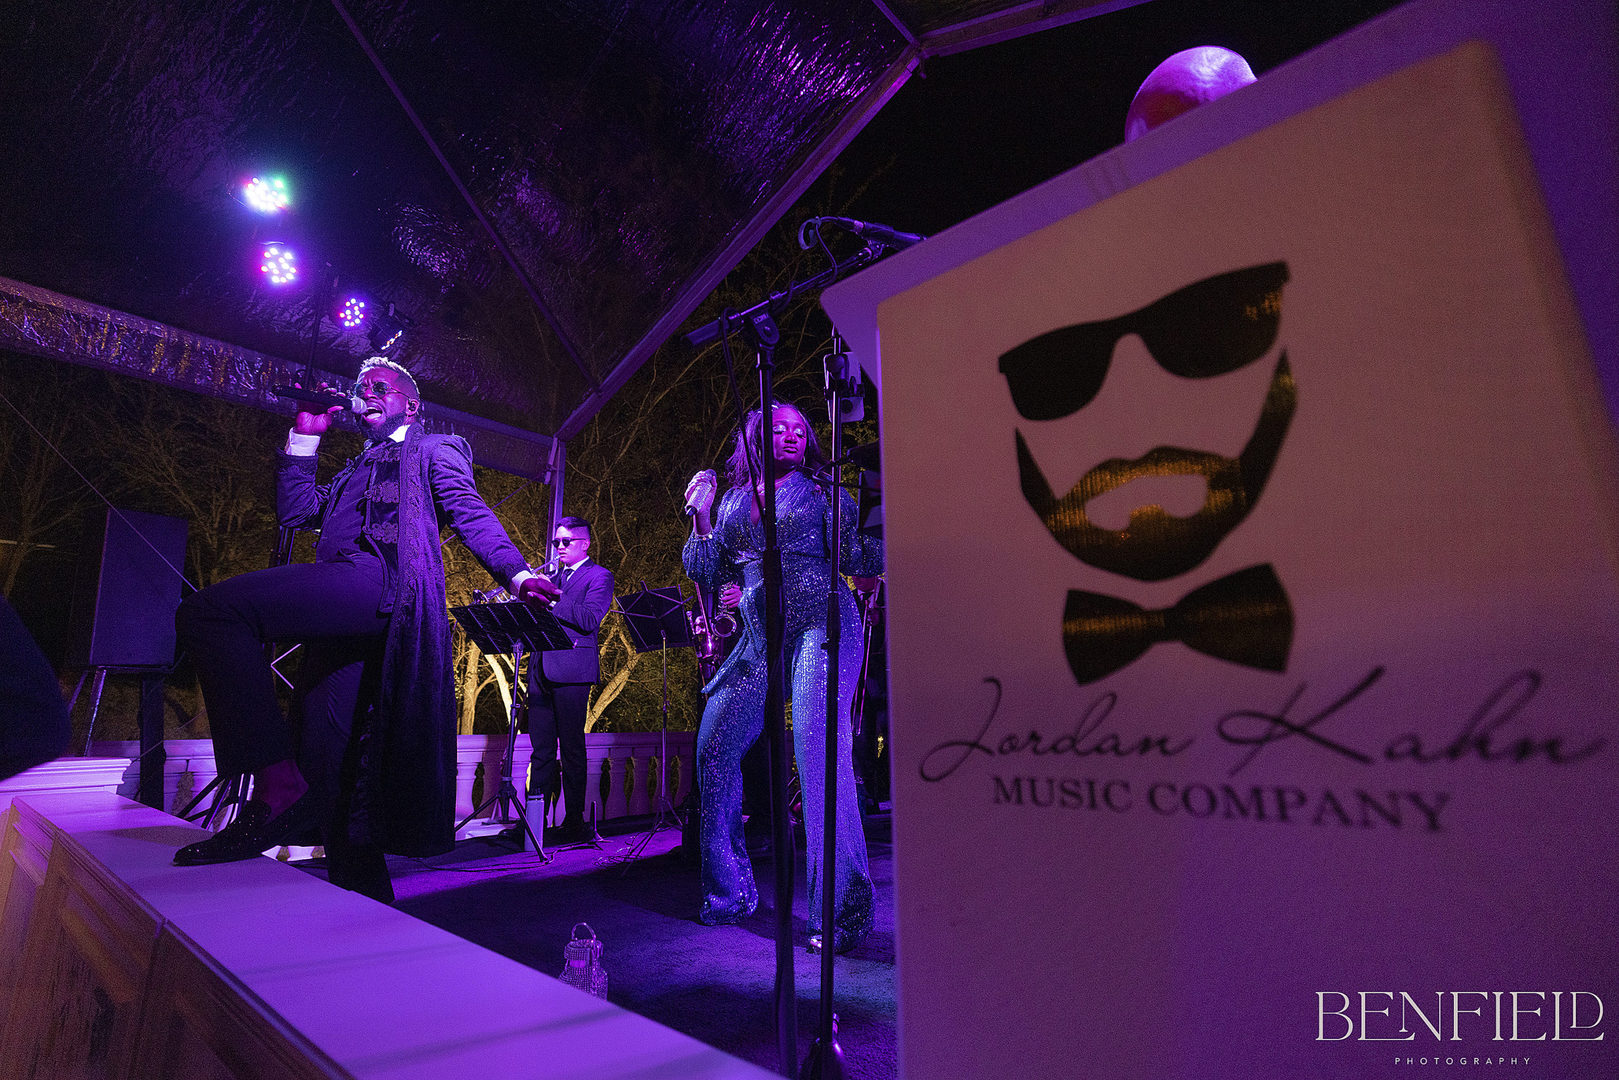 Jordan Kahn Music Company performs a song on stage at the Hillside Estate wedding reception.